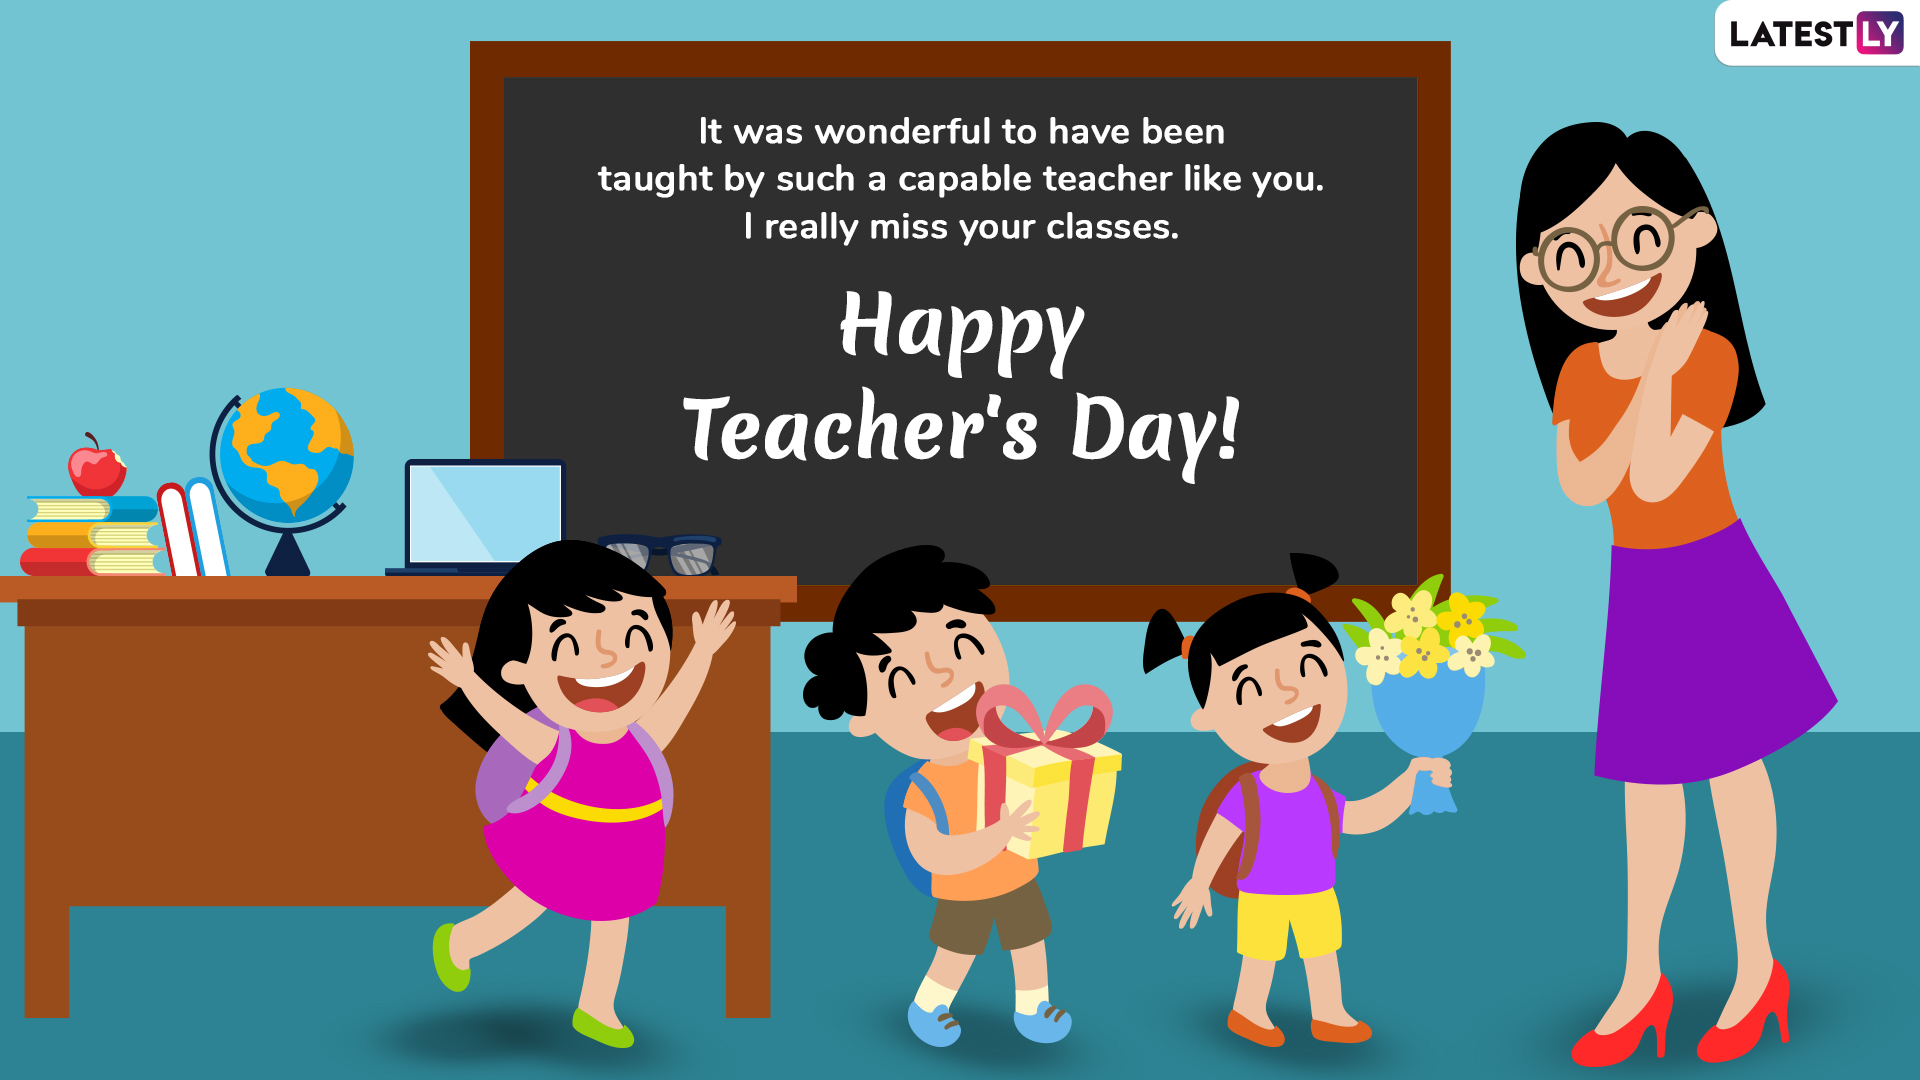 happy-teacher-s-day-2020-greetings-whatsapp-stickers-gif-images